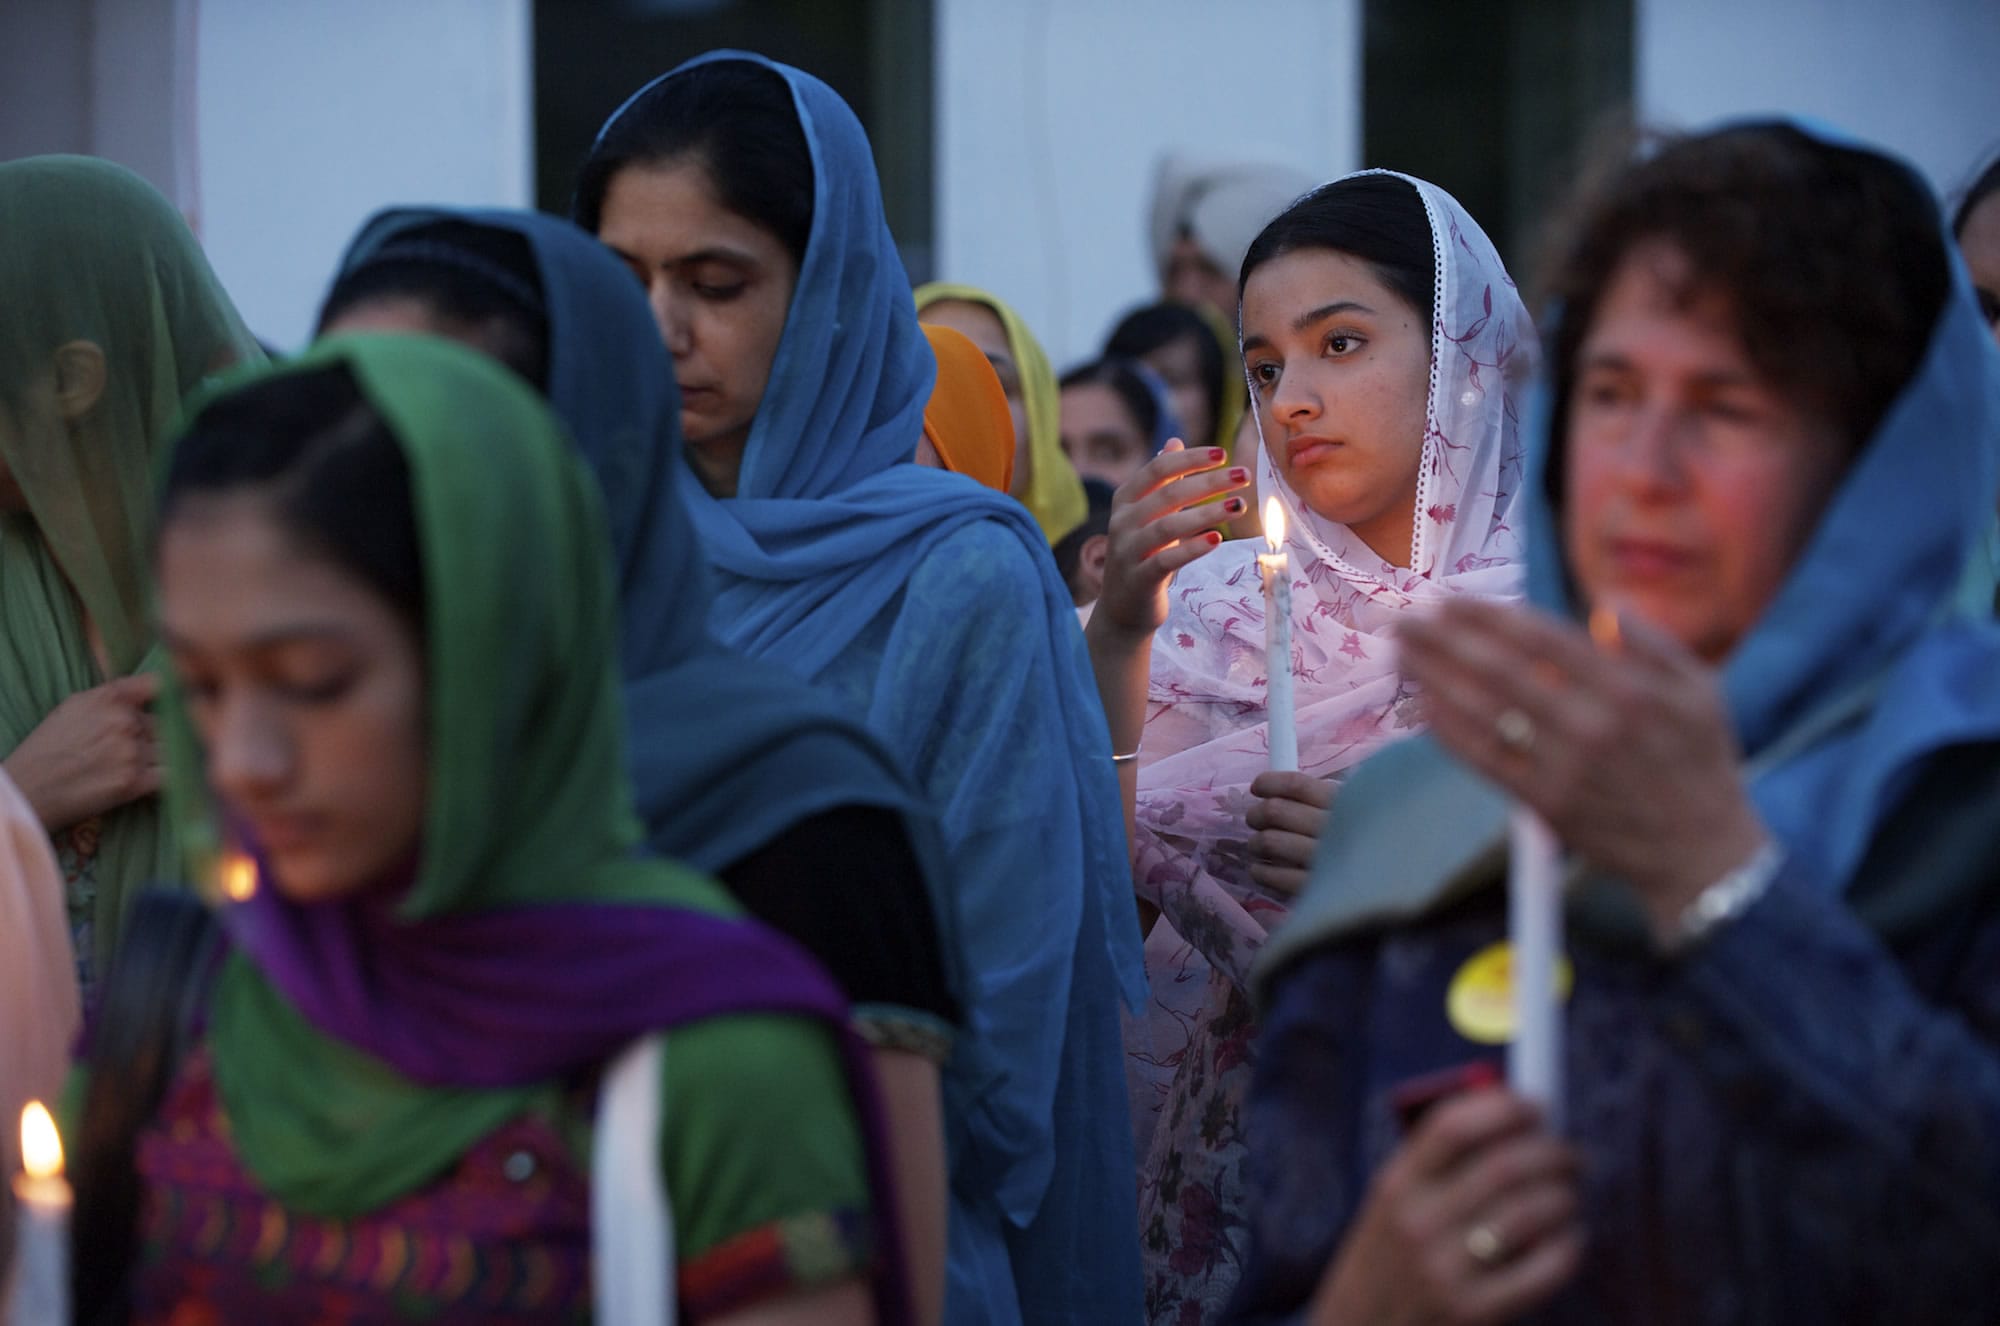 The Guru Ramdass Gurdwara Sikh temple in Vancouver hosted a candlelight vigil on Thursday in memory of the victims of a gunman who walked into a Sikh temple in Wisconsin and opened fire.